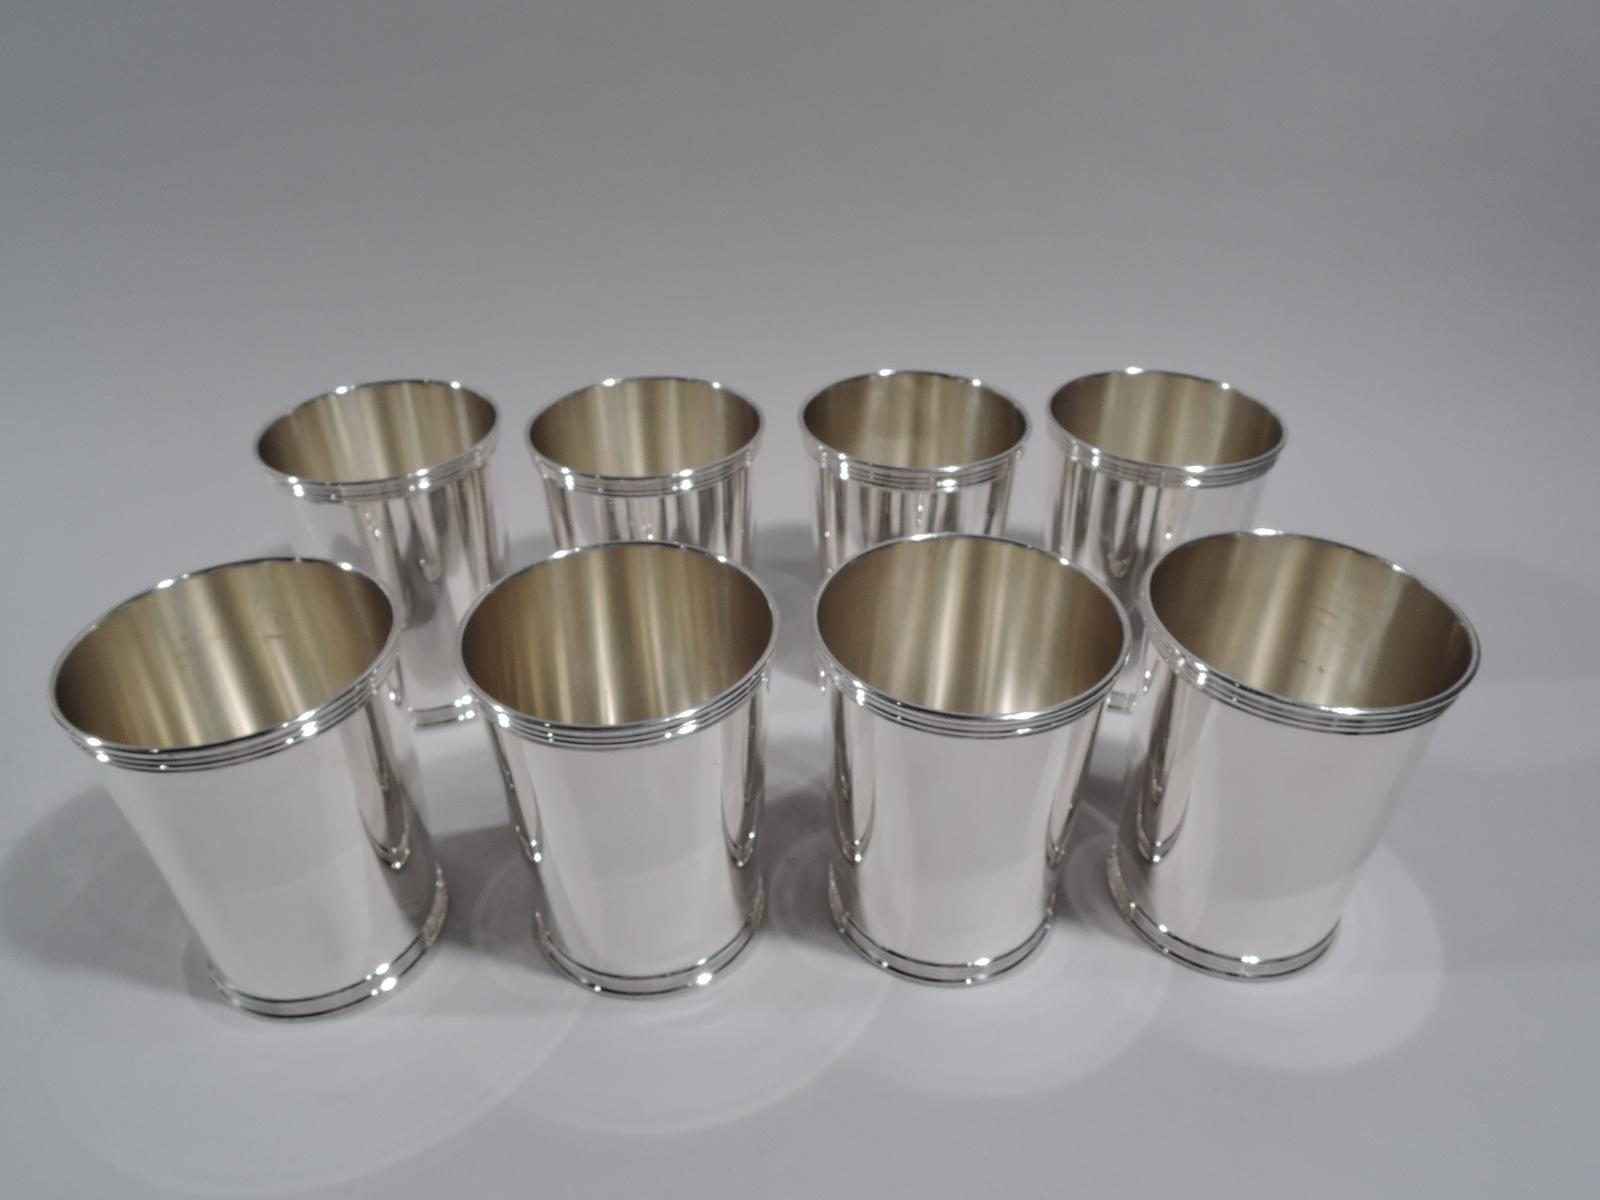 Set of 8 sterling silver mint julep cups. Made by Manchester in Providence. Each straight and tapering sides and reeded rim and foot. Fully marked and numbered 3759. Total weight: 31 troy ounces.